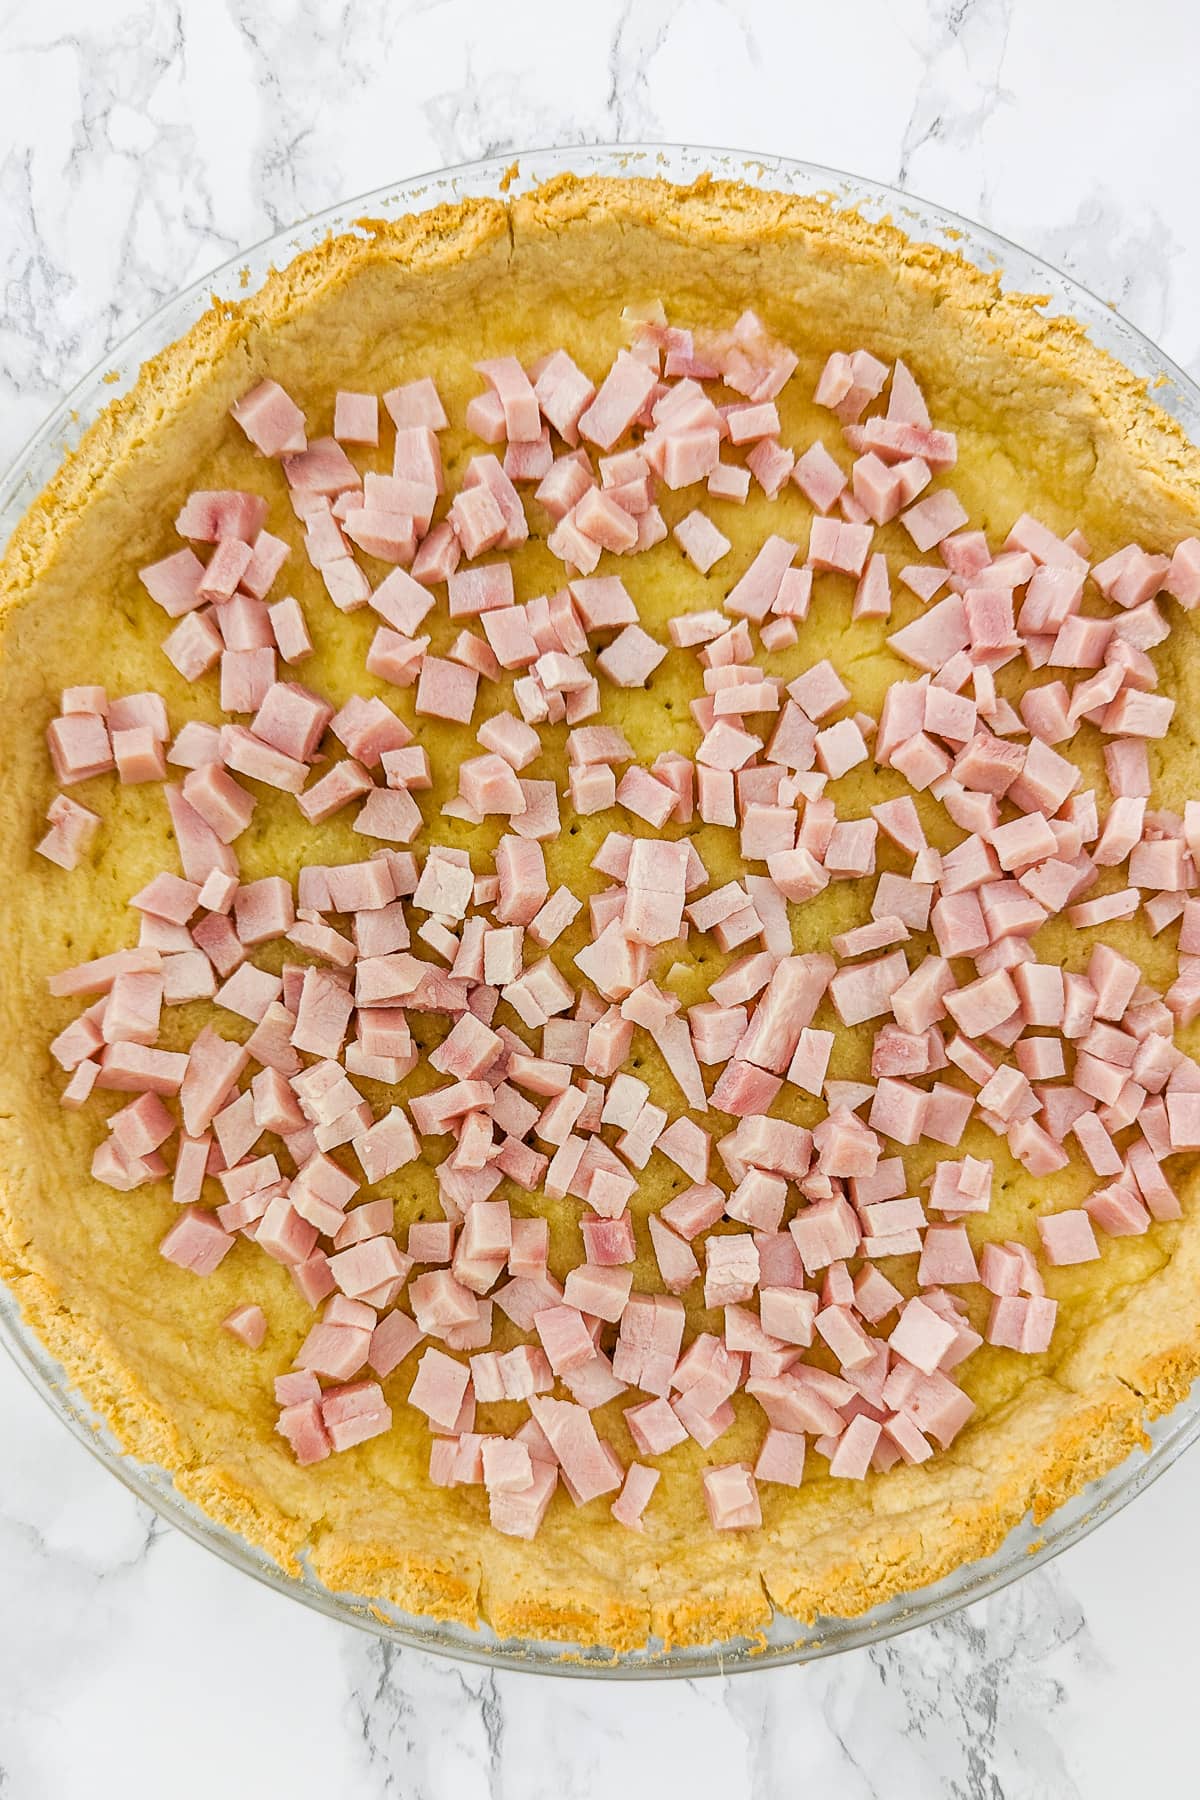 Top view of a tart covered with small pieces of ham.